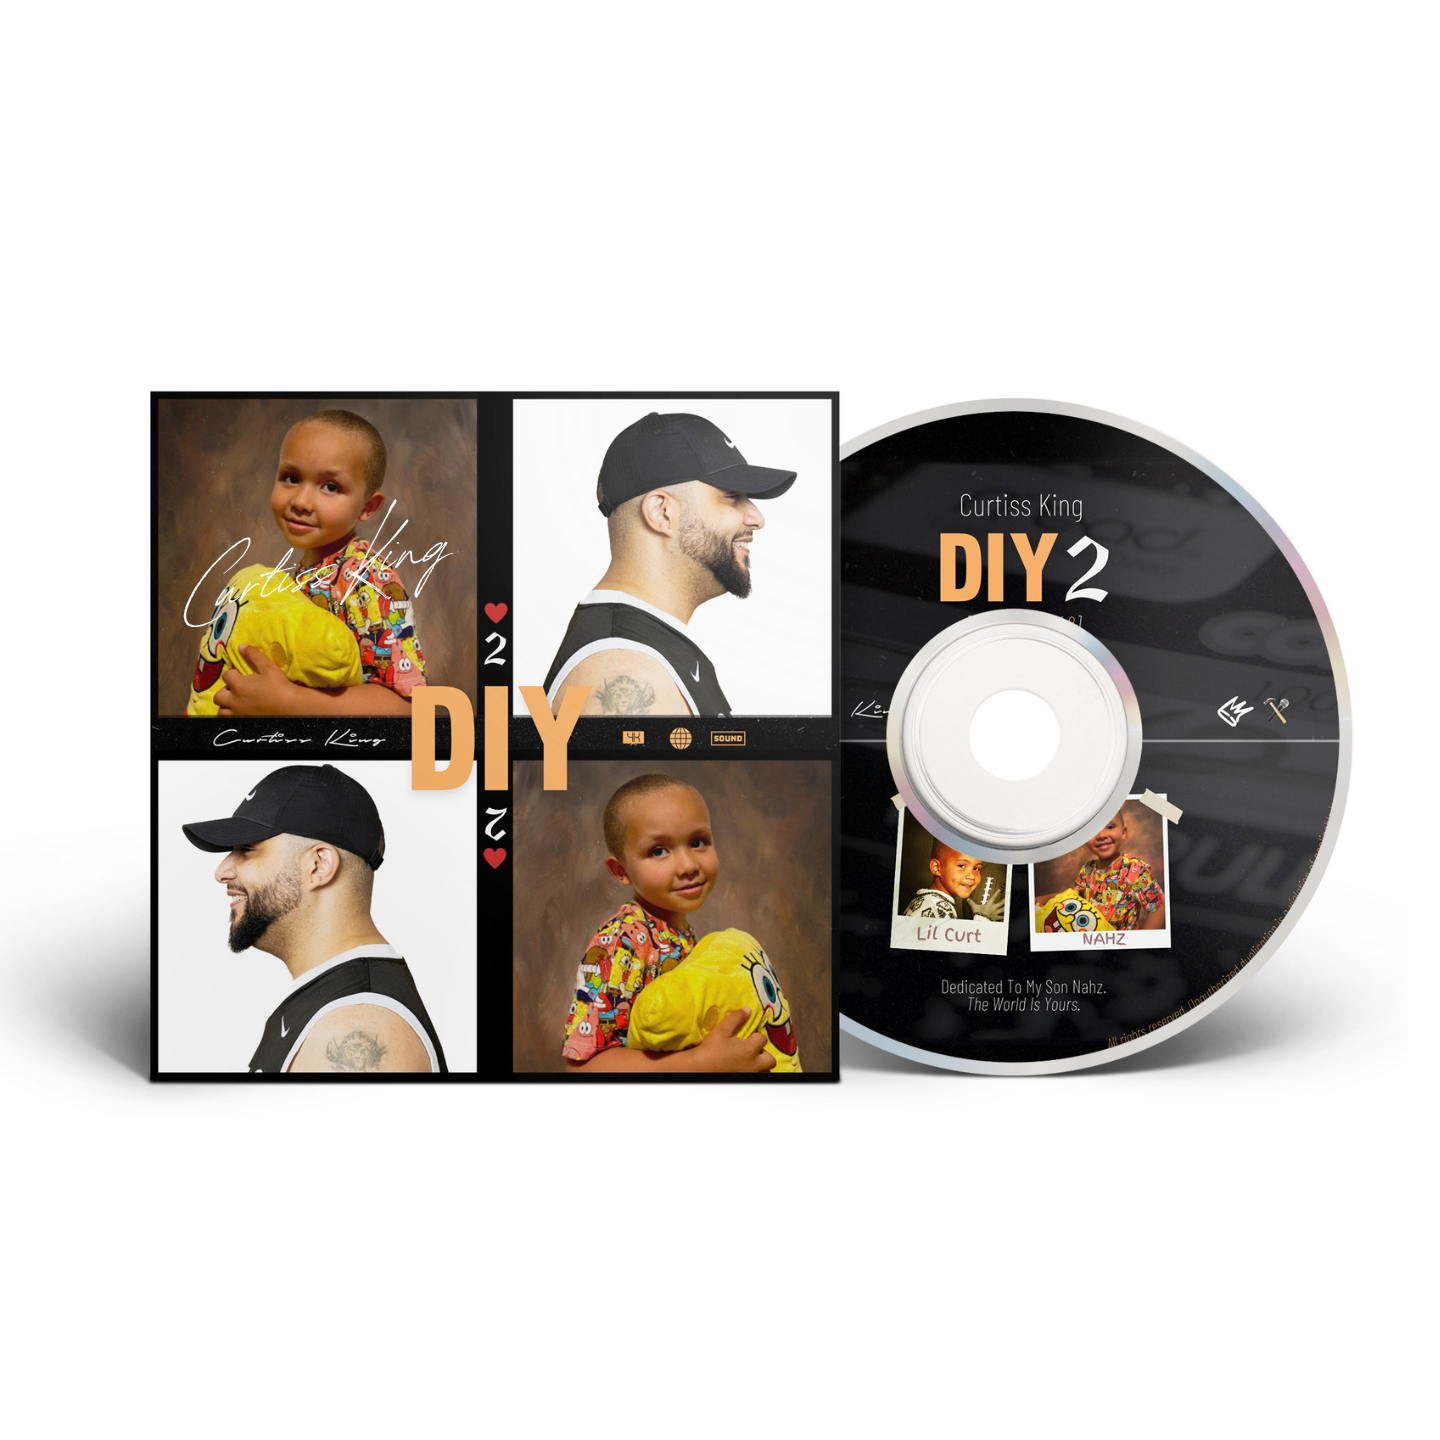 DIY 2 by Curtiss King